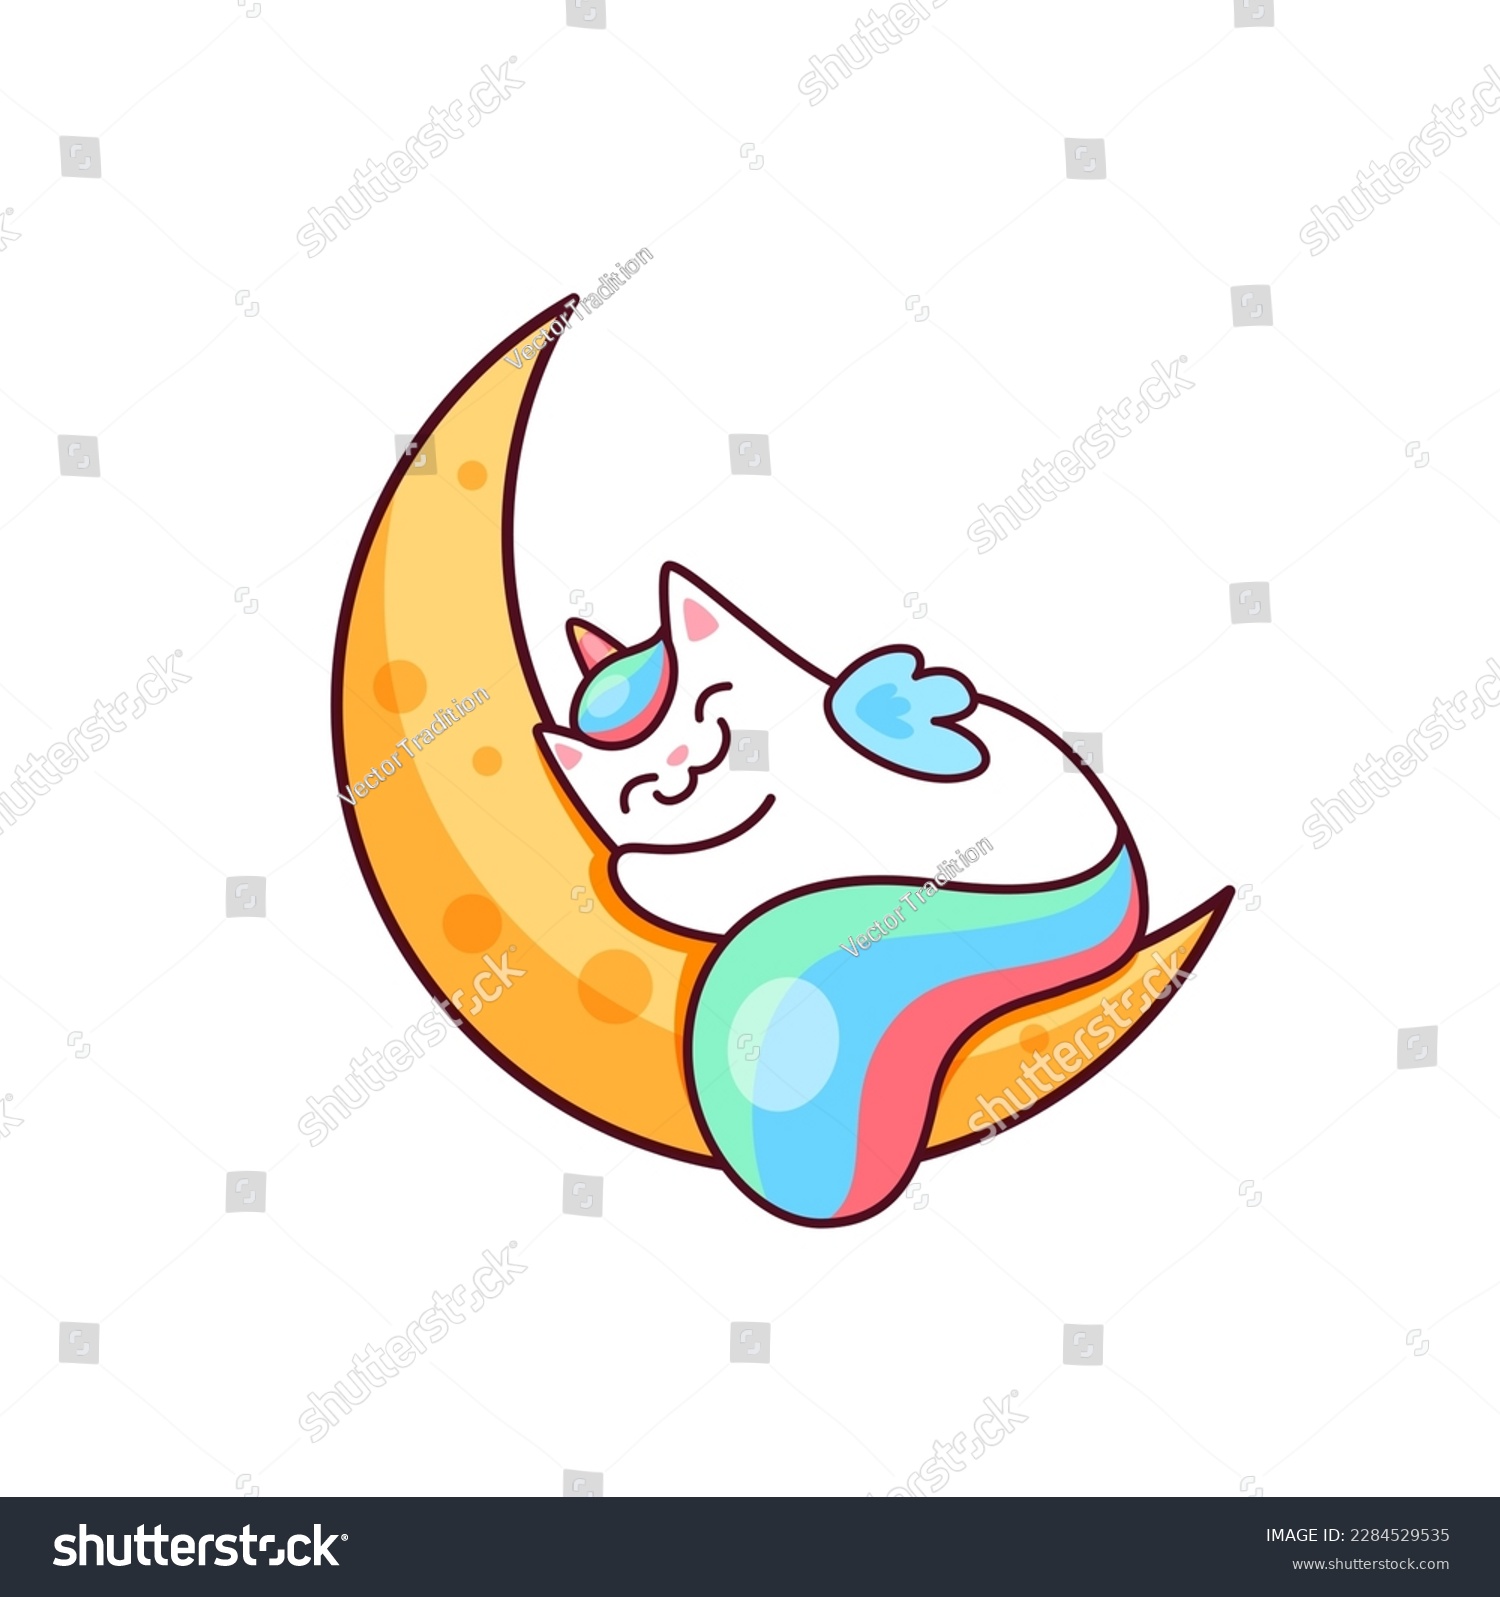 SVG of Cartoon cute kawaii caticorn character sleeping on the moon. Vector white unicorn cat with colorful rainbow tail. Magic kitty with horn sleep on crescent seeing sweet dreams. Funny kitten personage svg